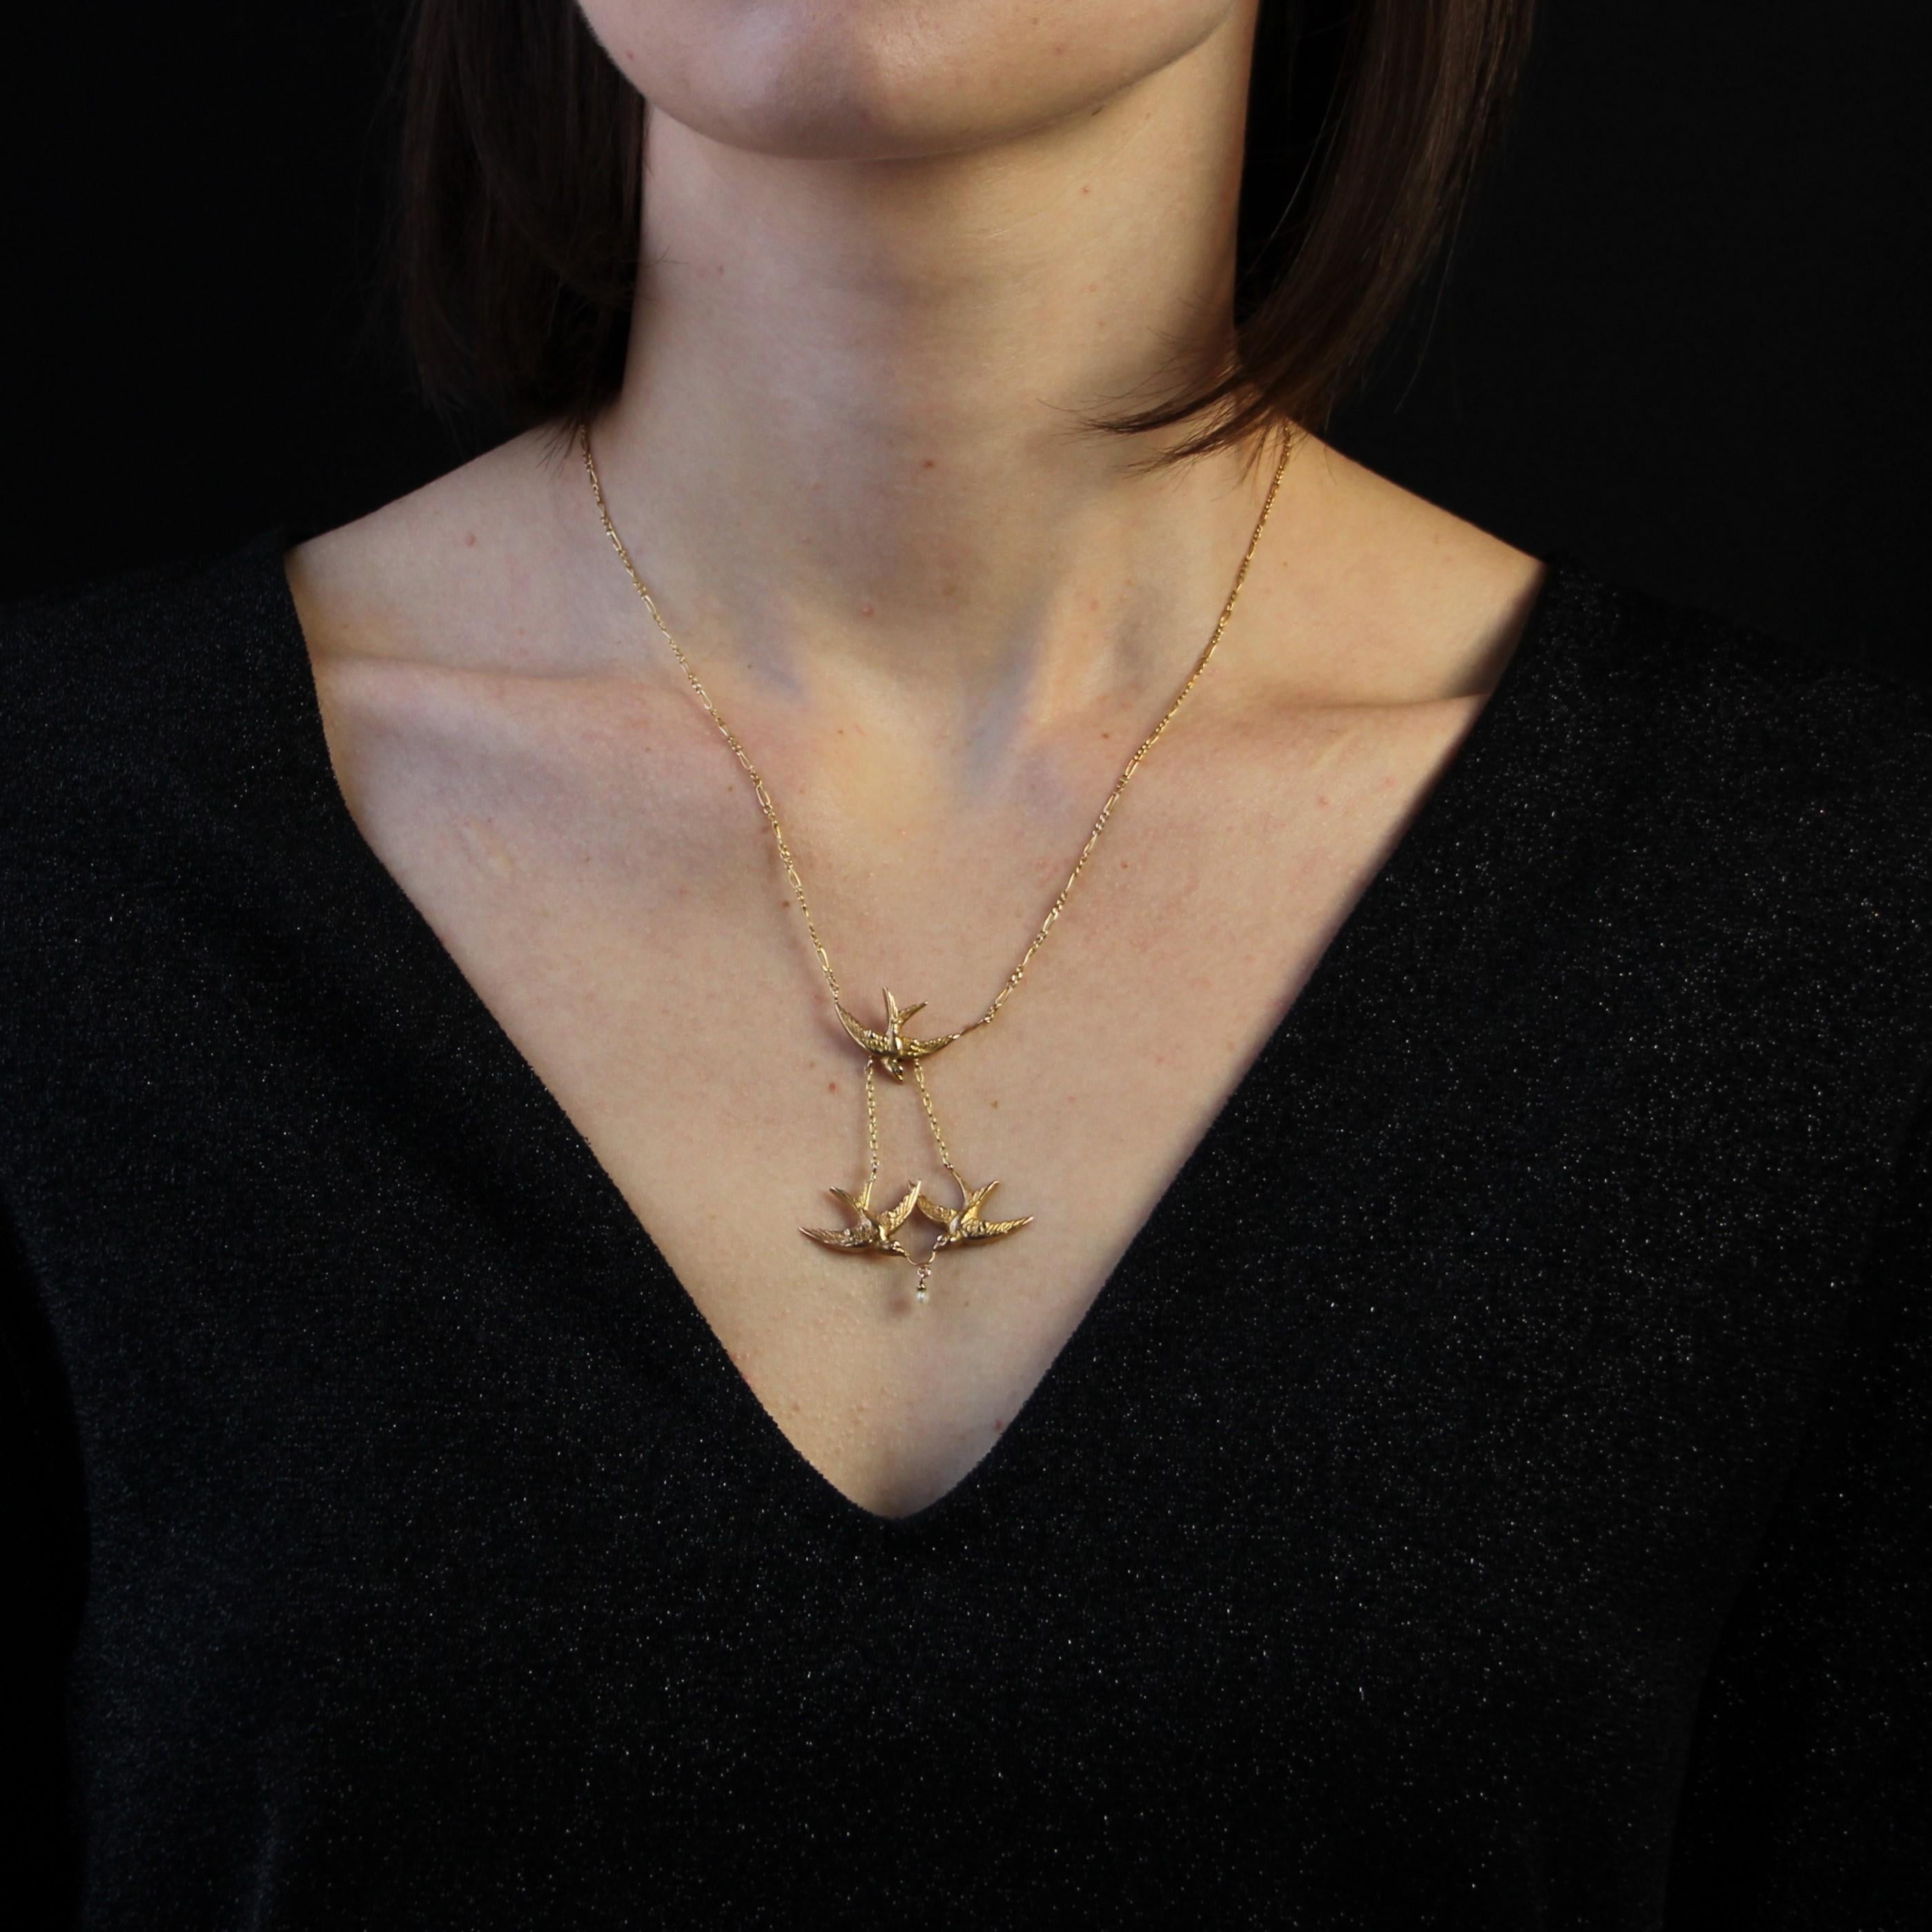 Necklace in 18 karat yellow gold, eagle head hallmark.
This delicate antique necklace is made of fine alternating gourmette mesh holding a motif of 3 swallows on the front, 2 of which are tassels holding a small baroque pearl in their beak. The